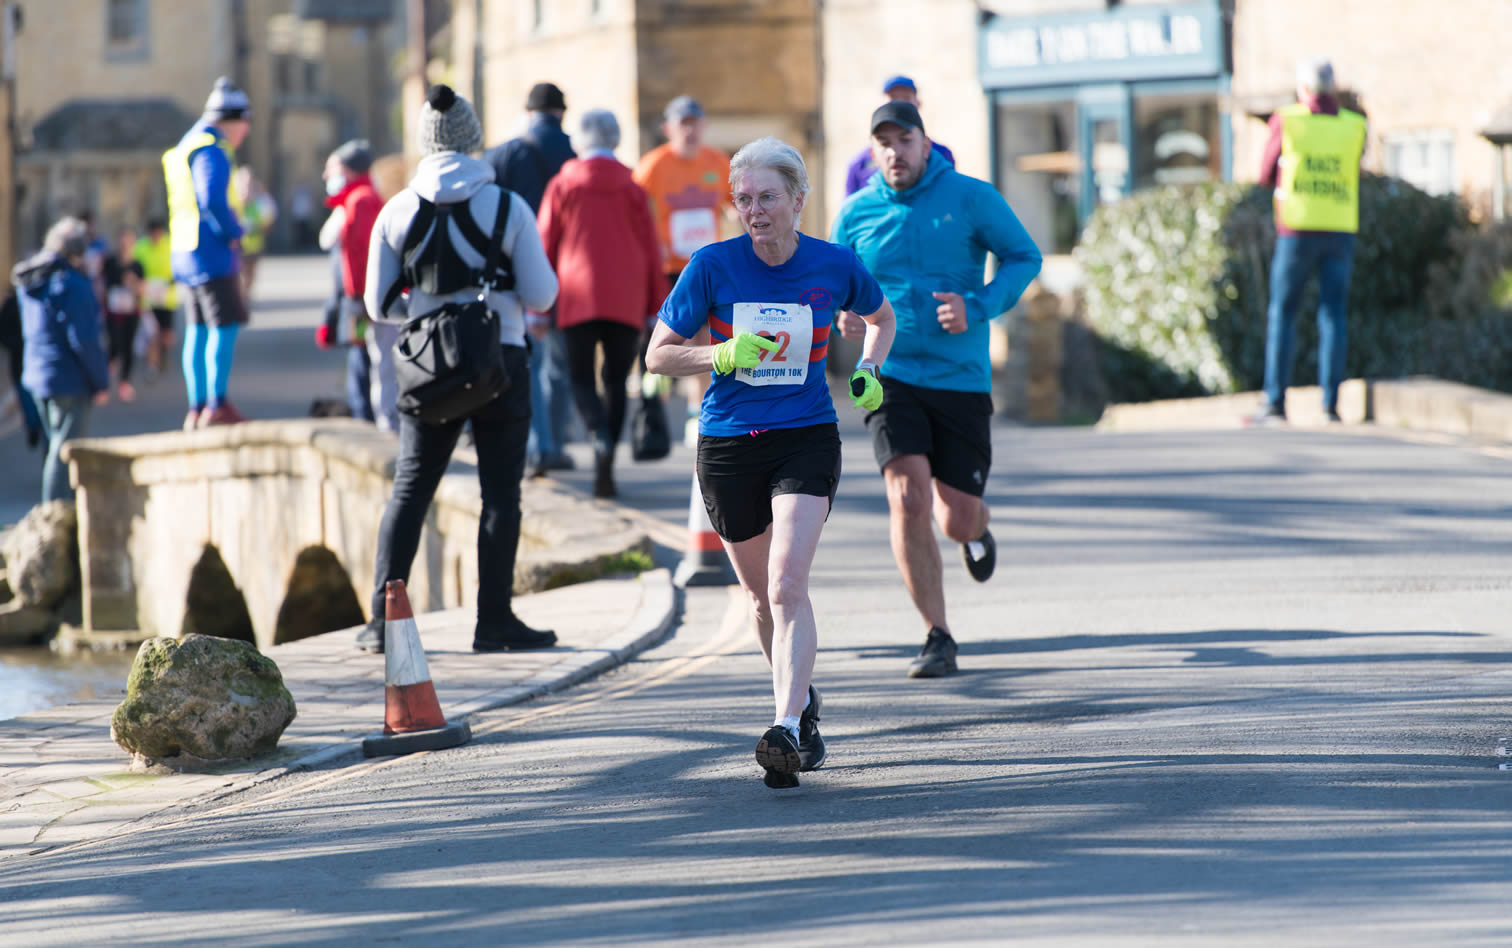 Gill Carrick at Bourton 10k - 27th February 2022